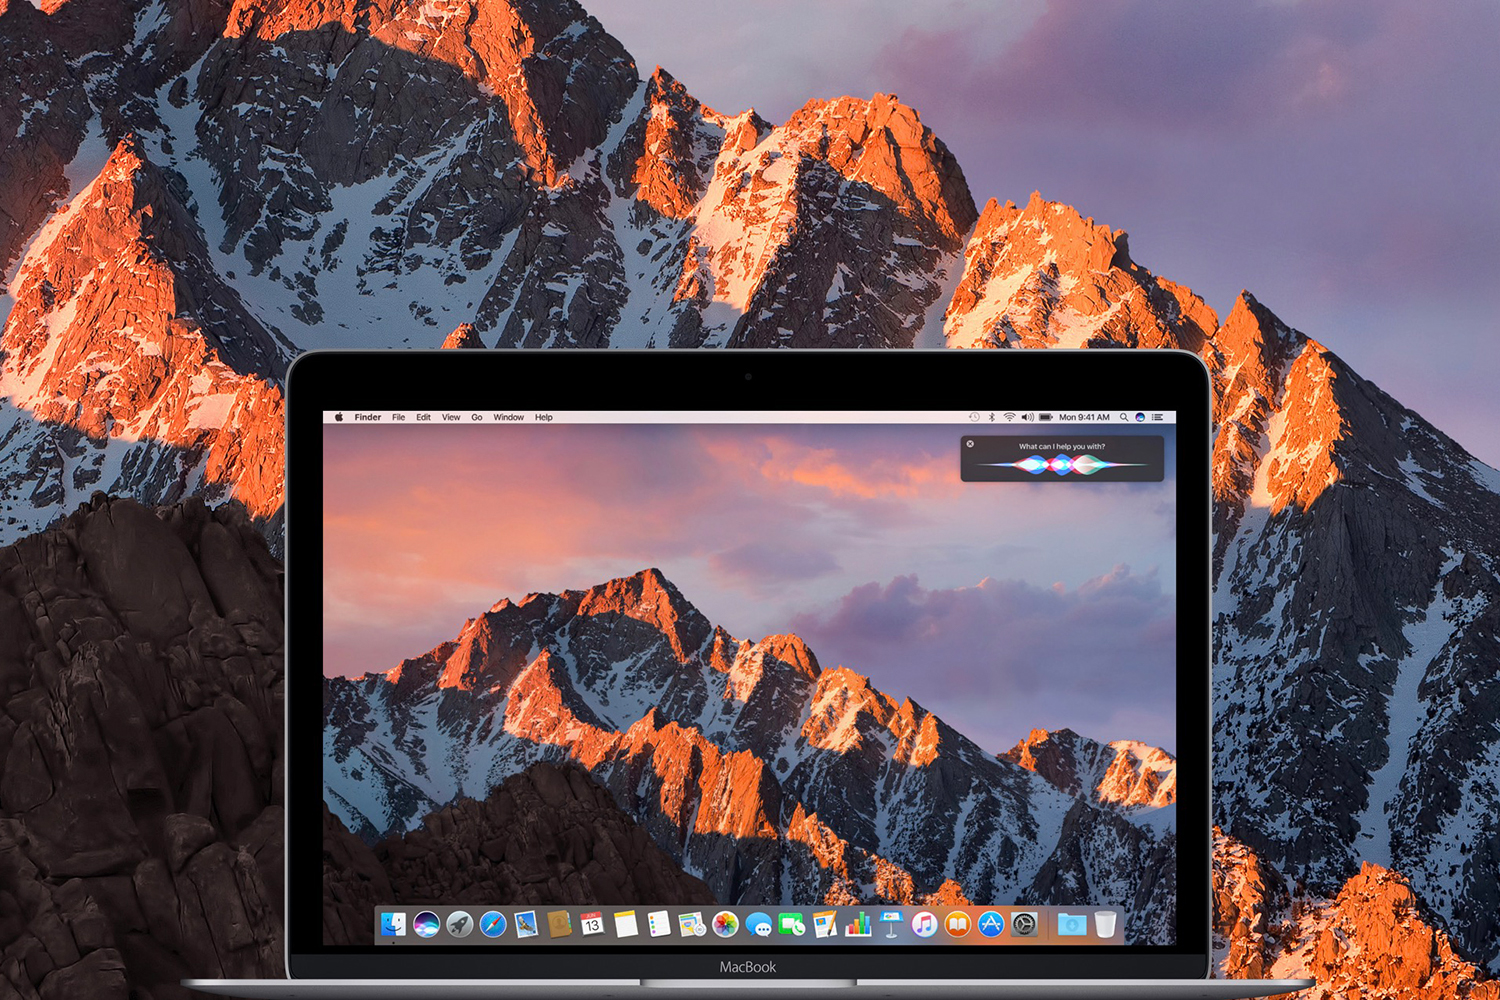 Whats new in Sierra Full Guide on macOS 1012 features